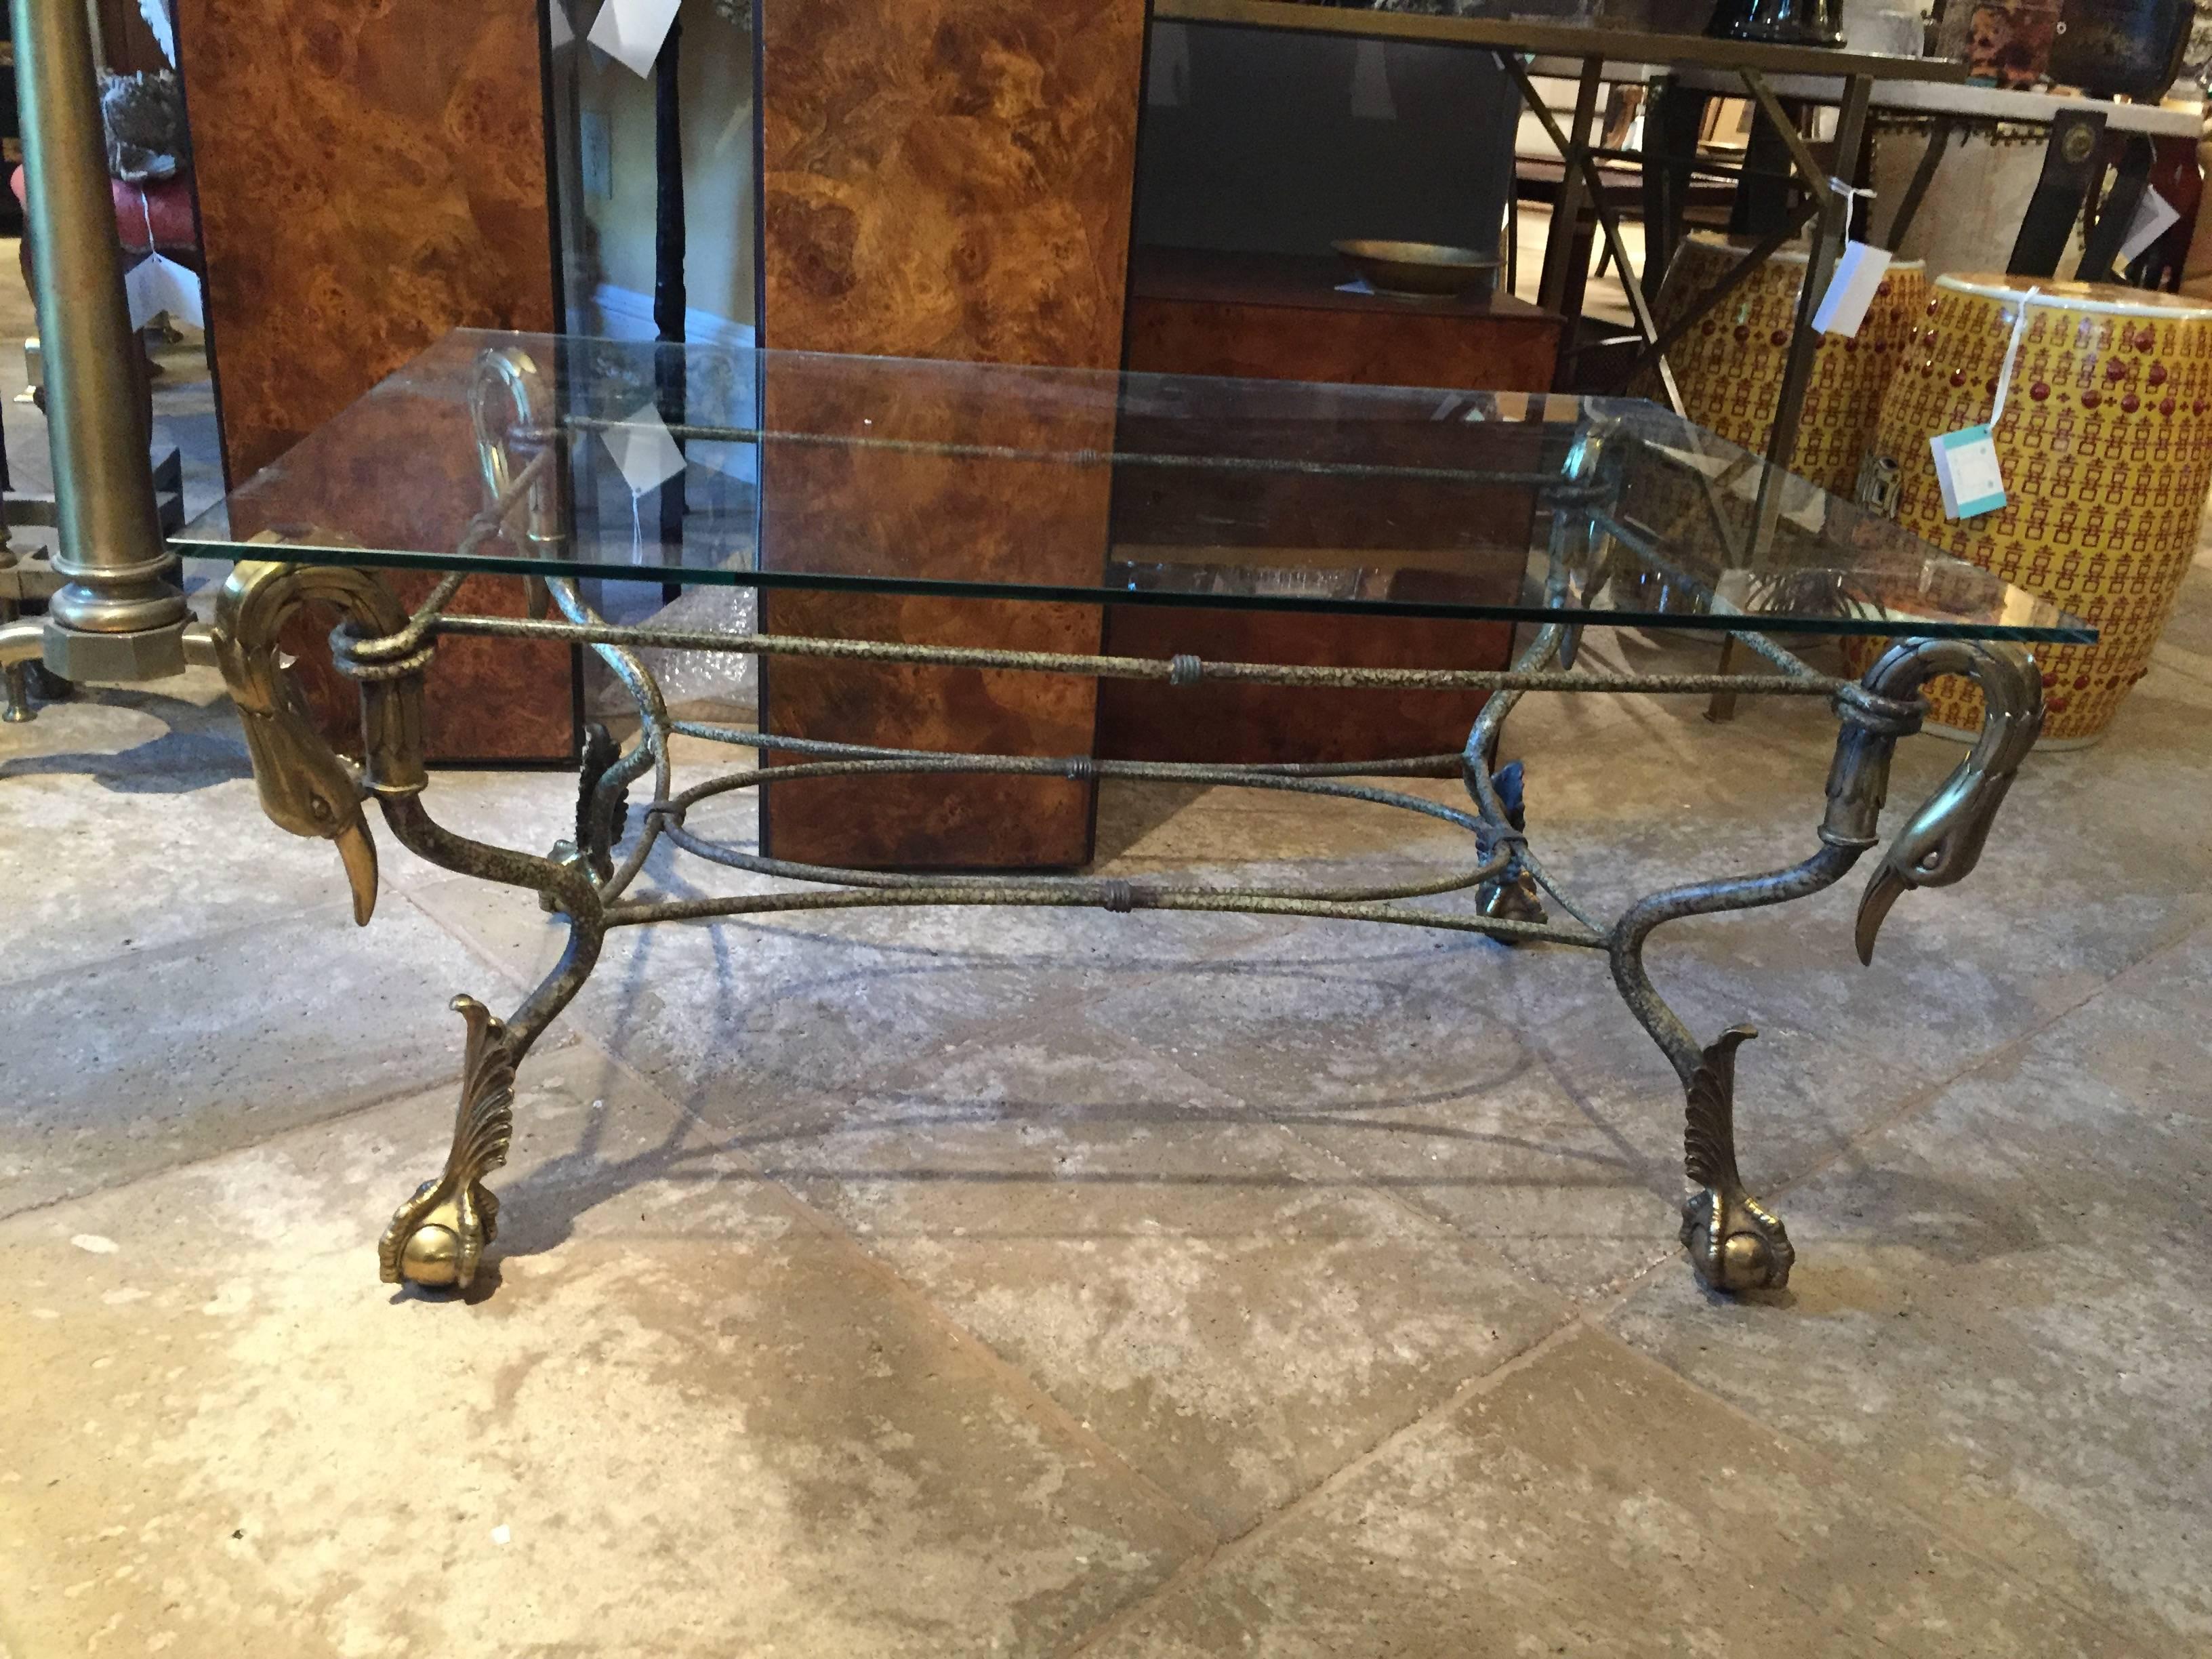 20th century swan head coffee table with glass top, brass and steel.